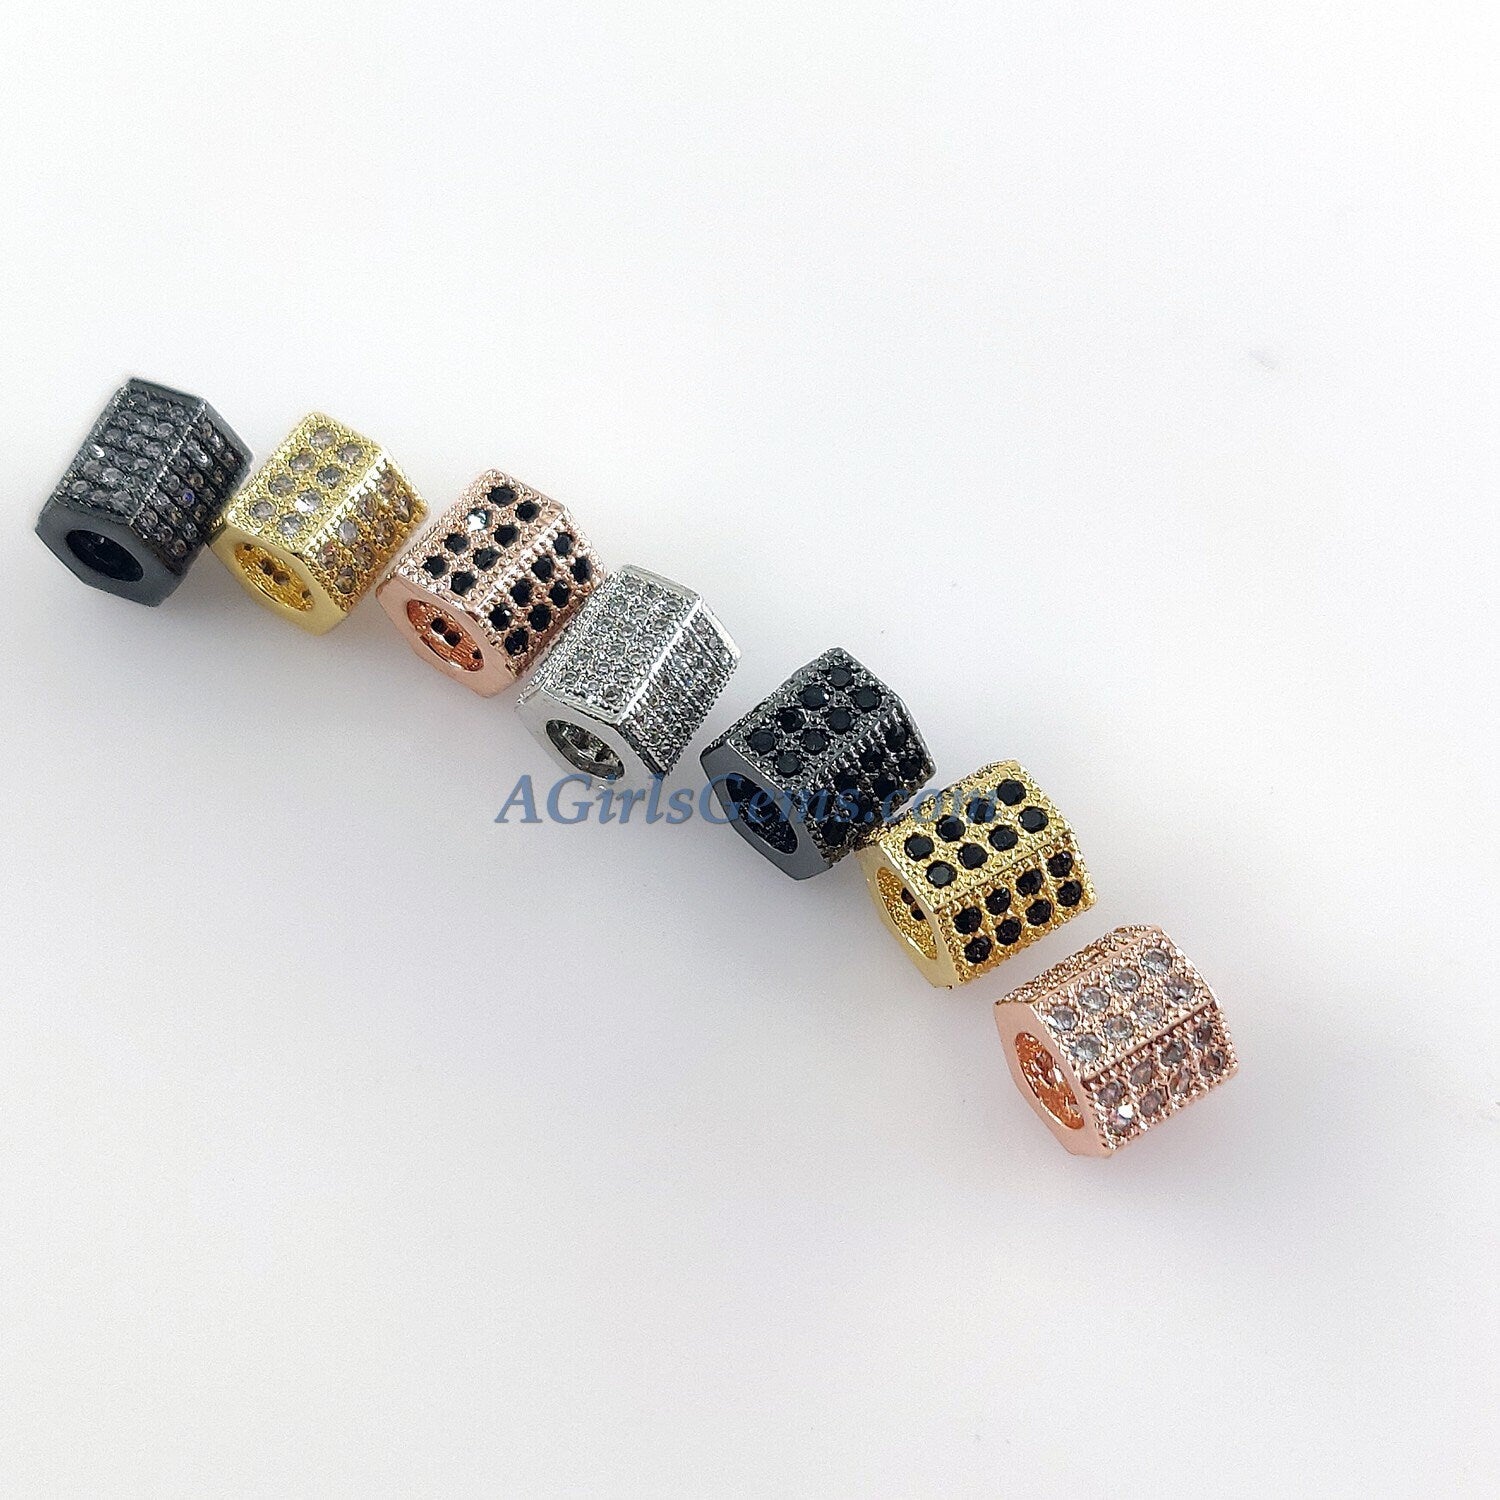 CZ Micro Pave Hexagon Tube Beads, 9 x 9 mm CZ Micro Pave 18 K Rose Gold/Gold and Black Pave CZ, Large Hole Beads